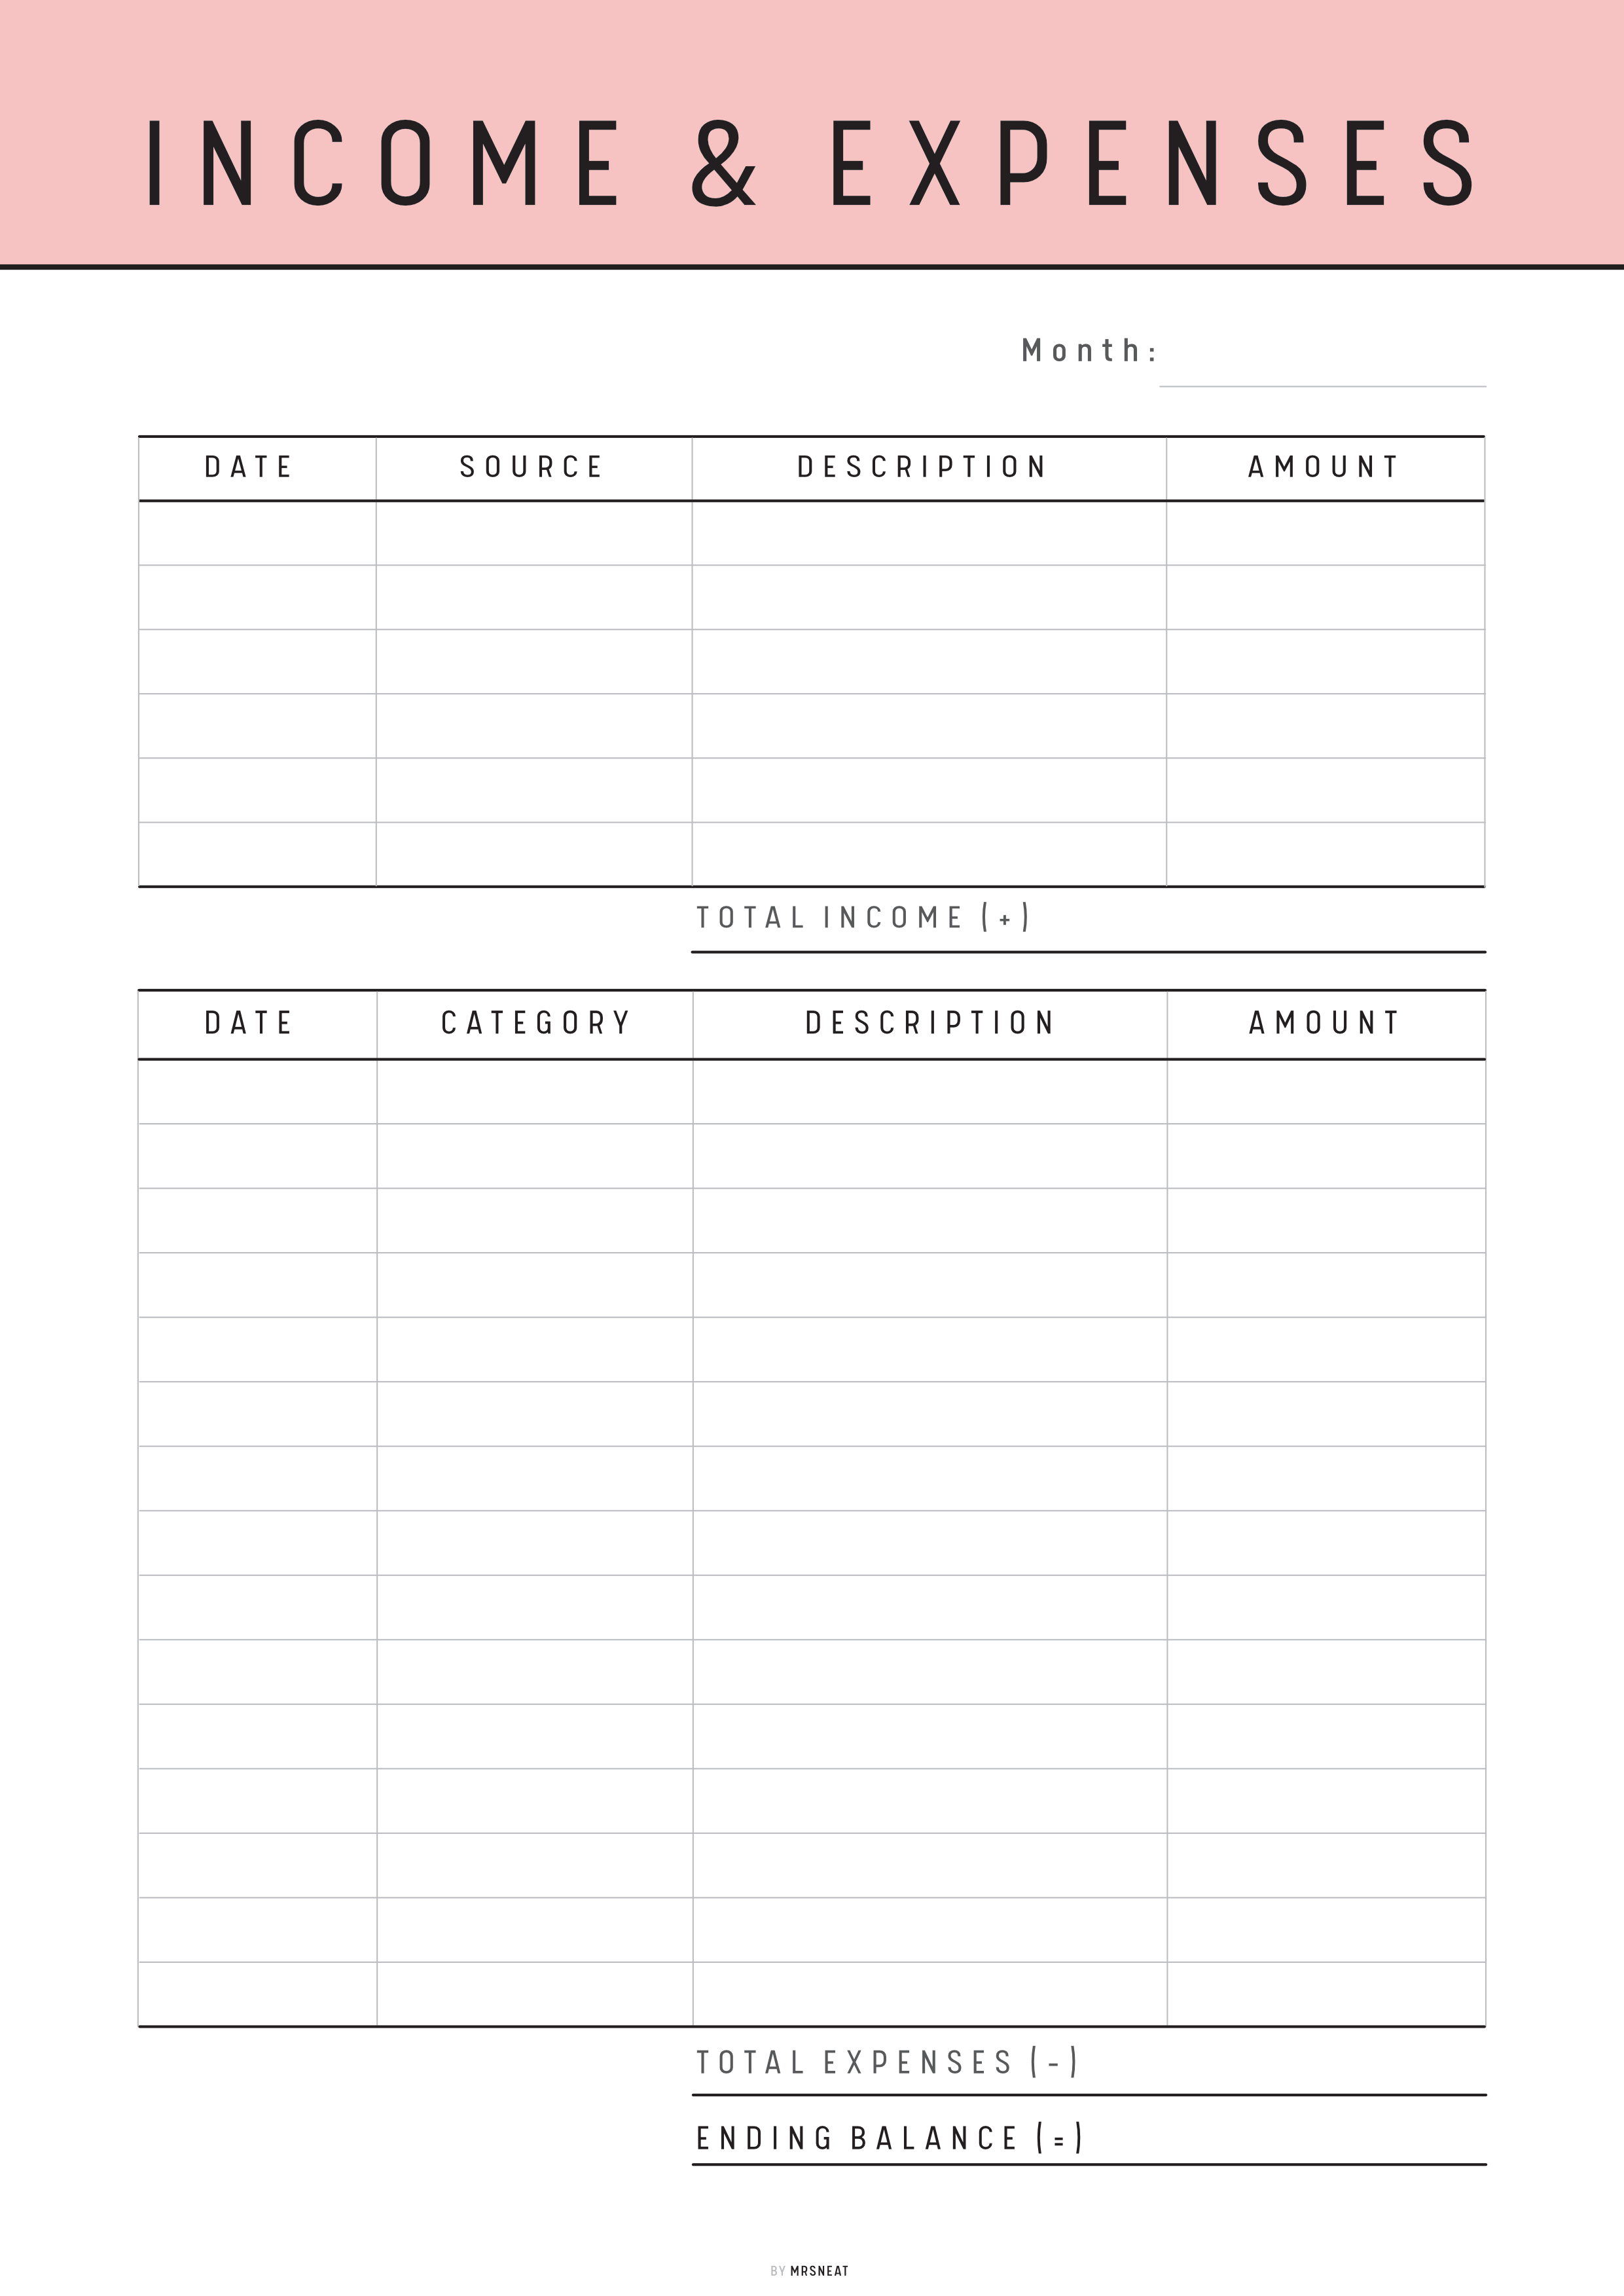 Achieve Your Financial Goals: Must-Have Income and Expense Tracker Printables